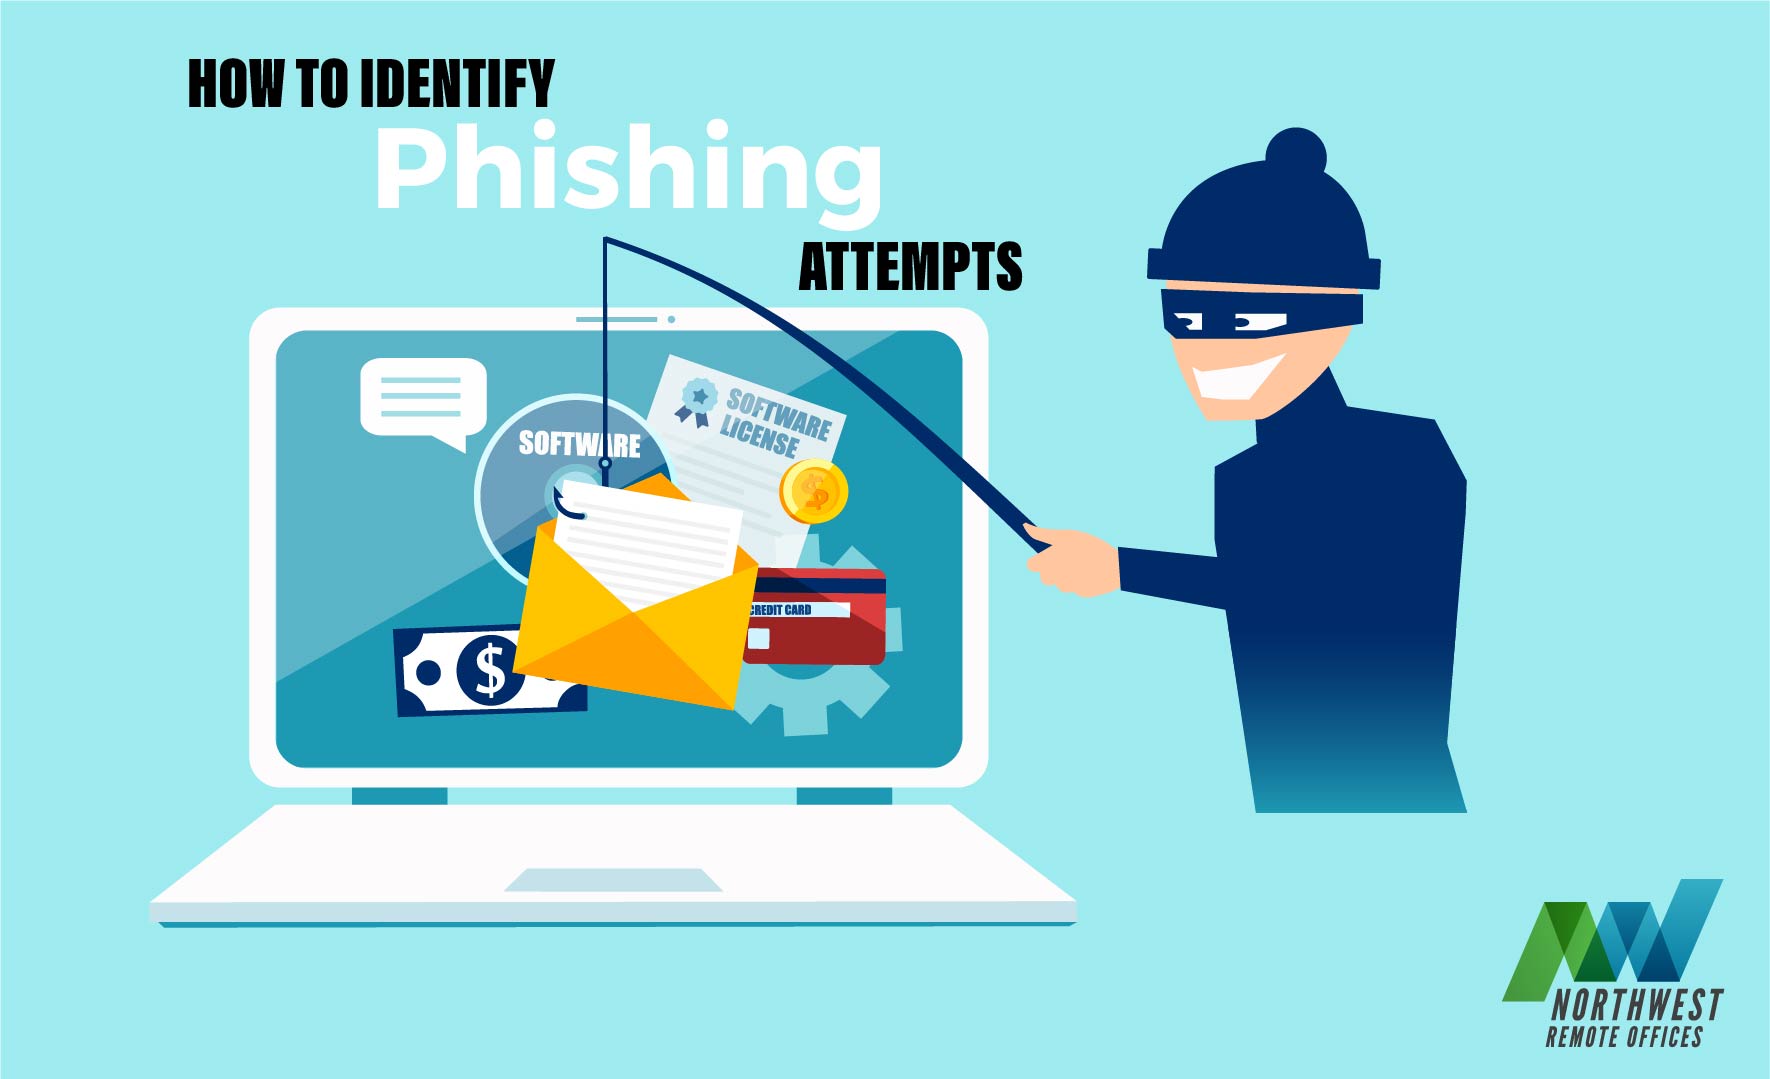 How to identify phishing attempts